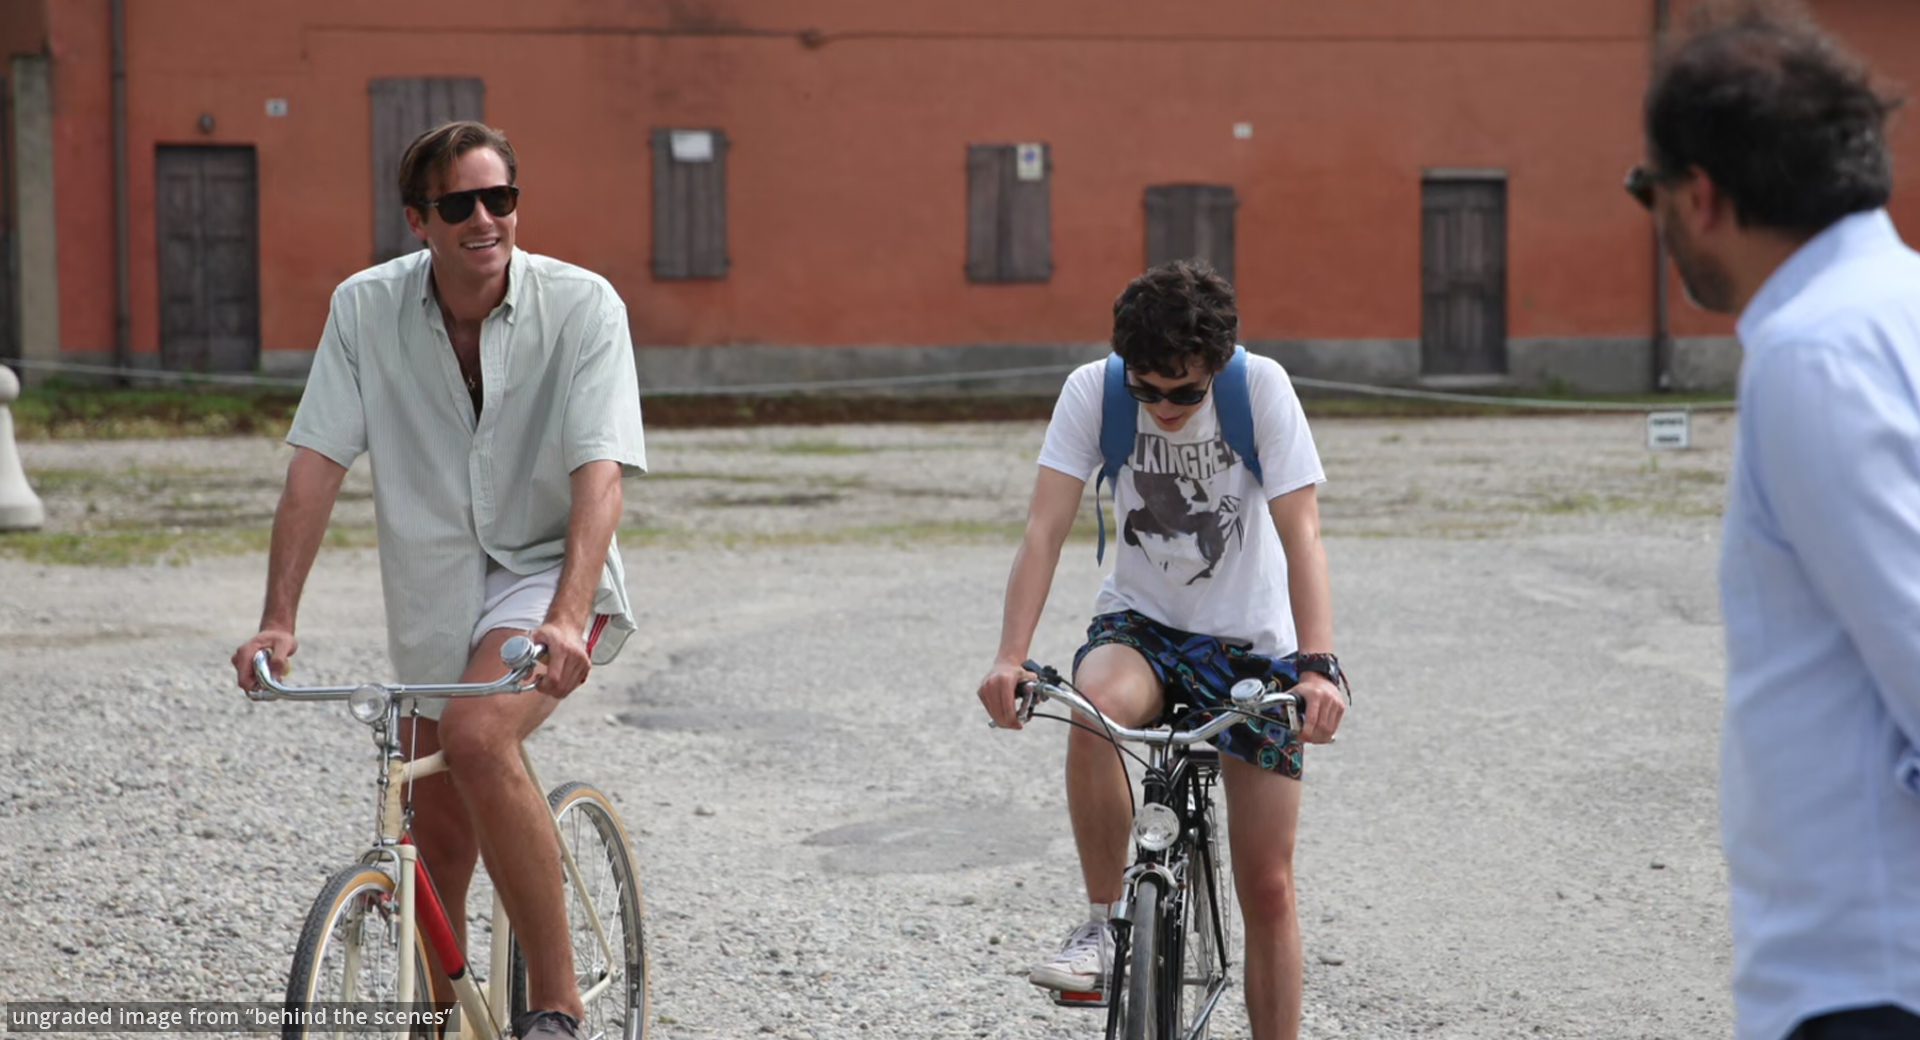 Call Me By Your Name is a luminous story in all respects – The Varsity